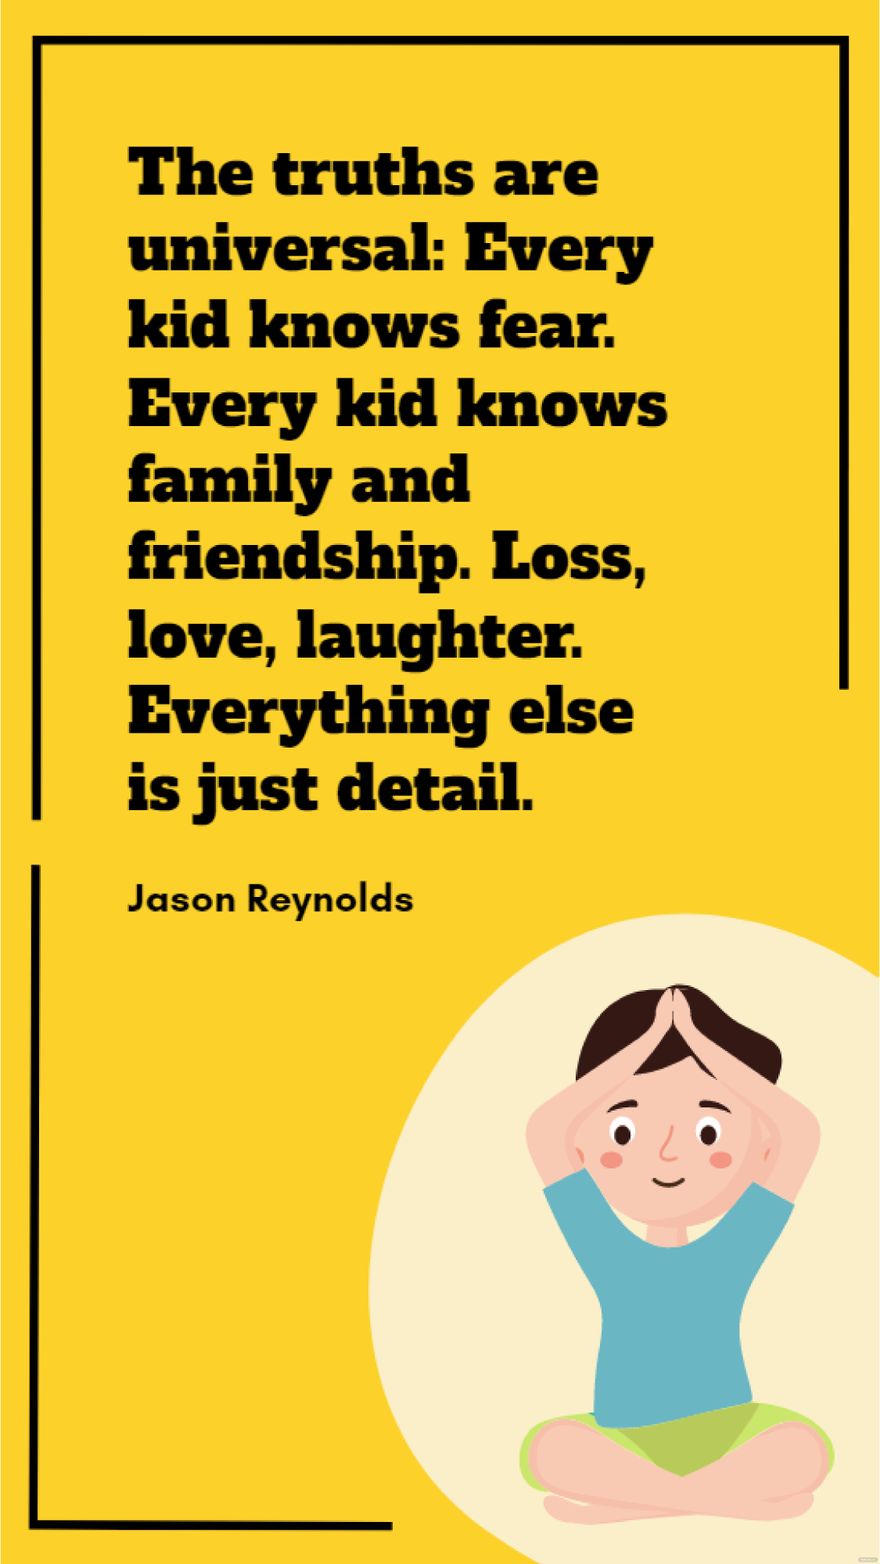 Jason Reynolds  The truths are universal Every kid knows fear Every kid knows family and friendship Loss love laughter Everything else is just detail